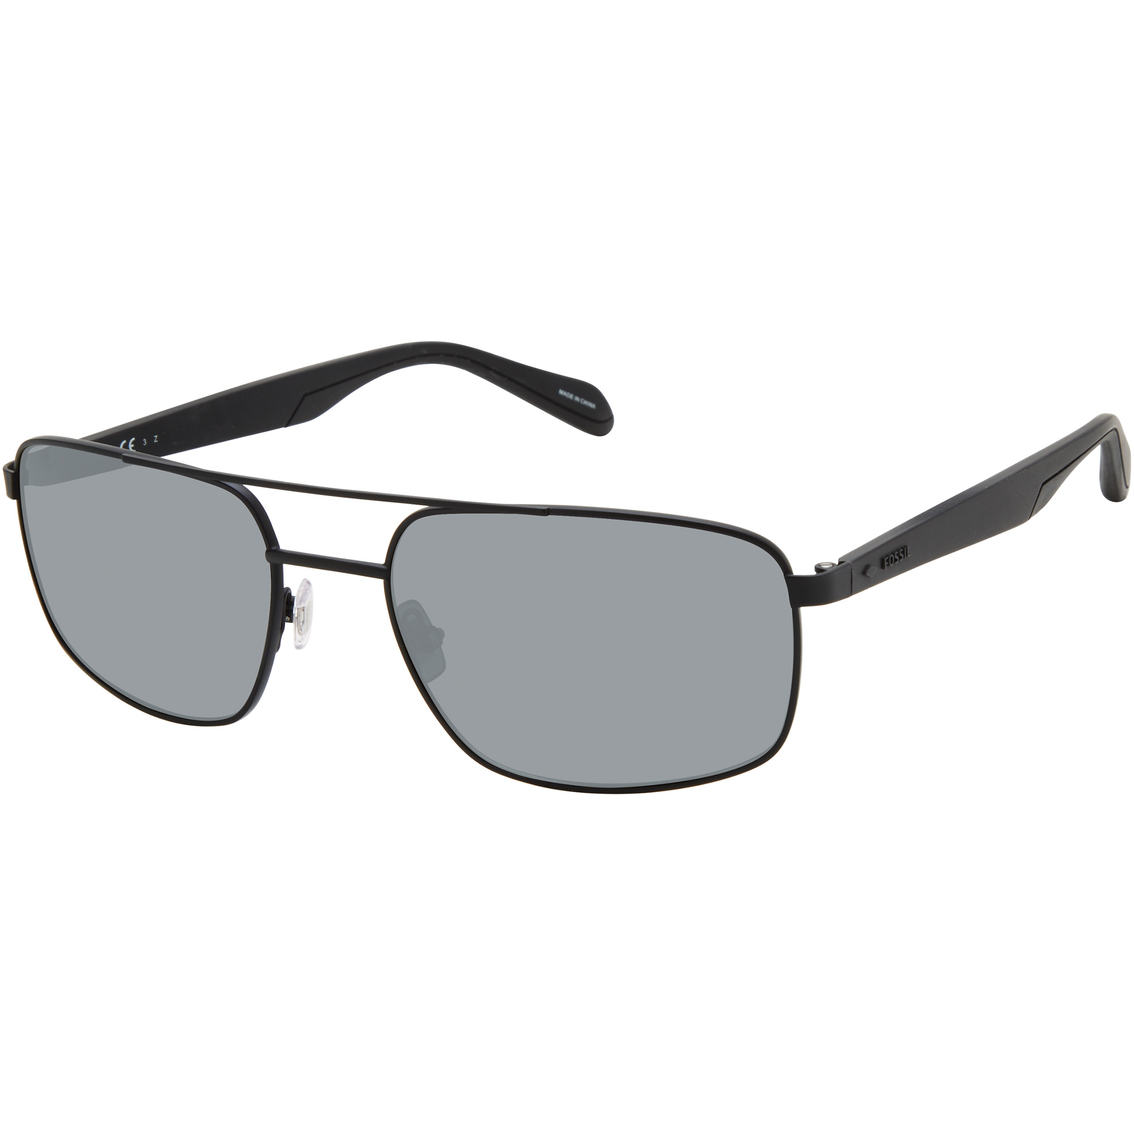 Fossil Sunglasses Mil62s 0003m9 | Sunglasses | Clothing & Accessories ...